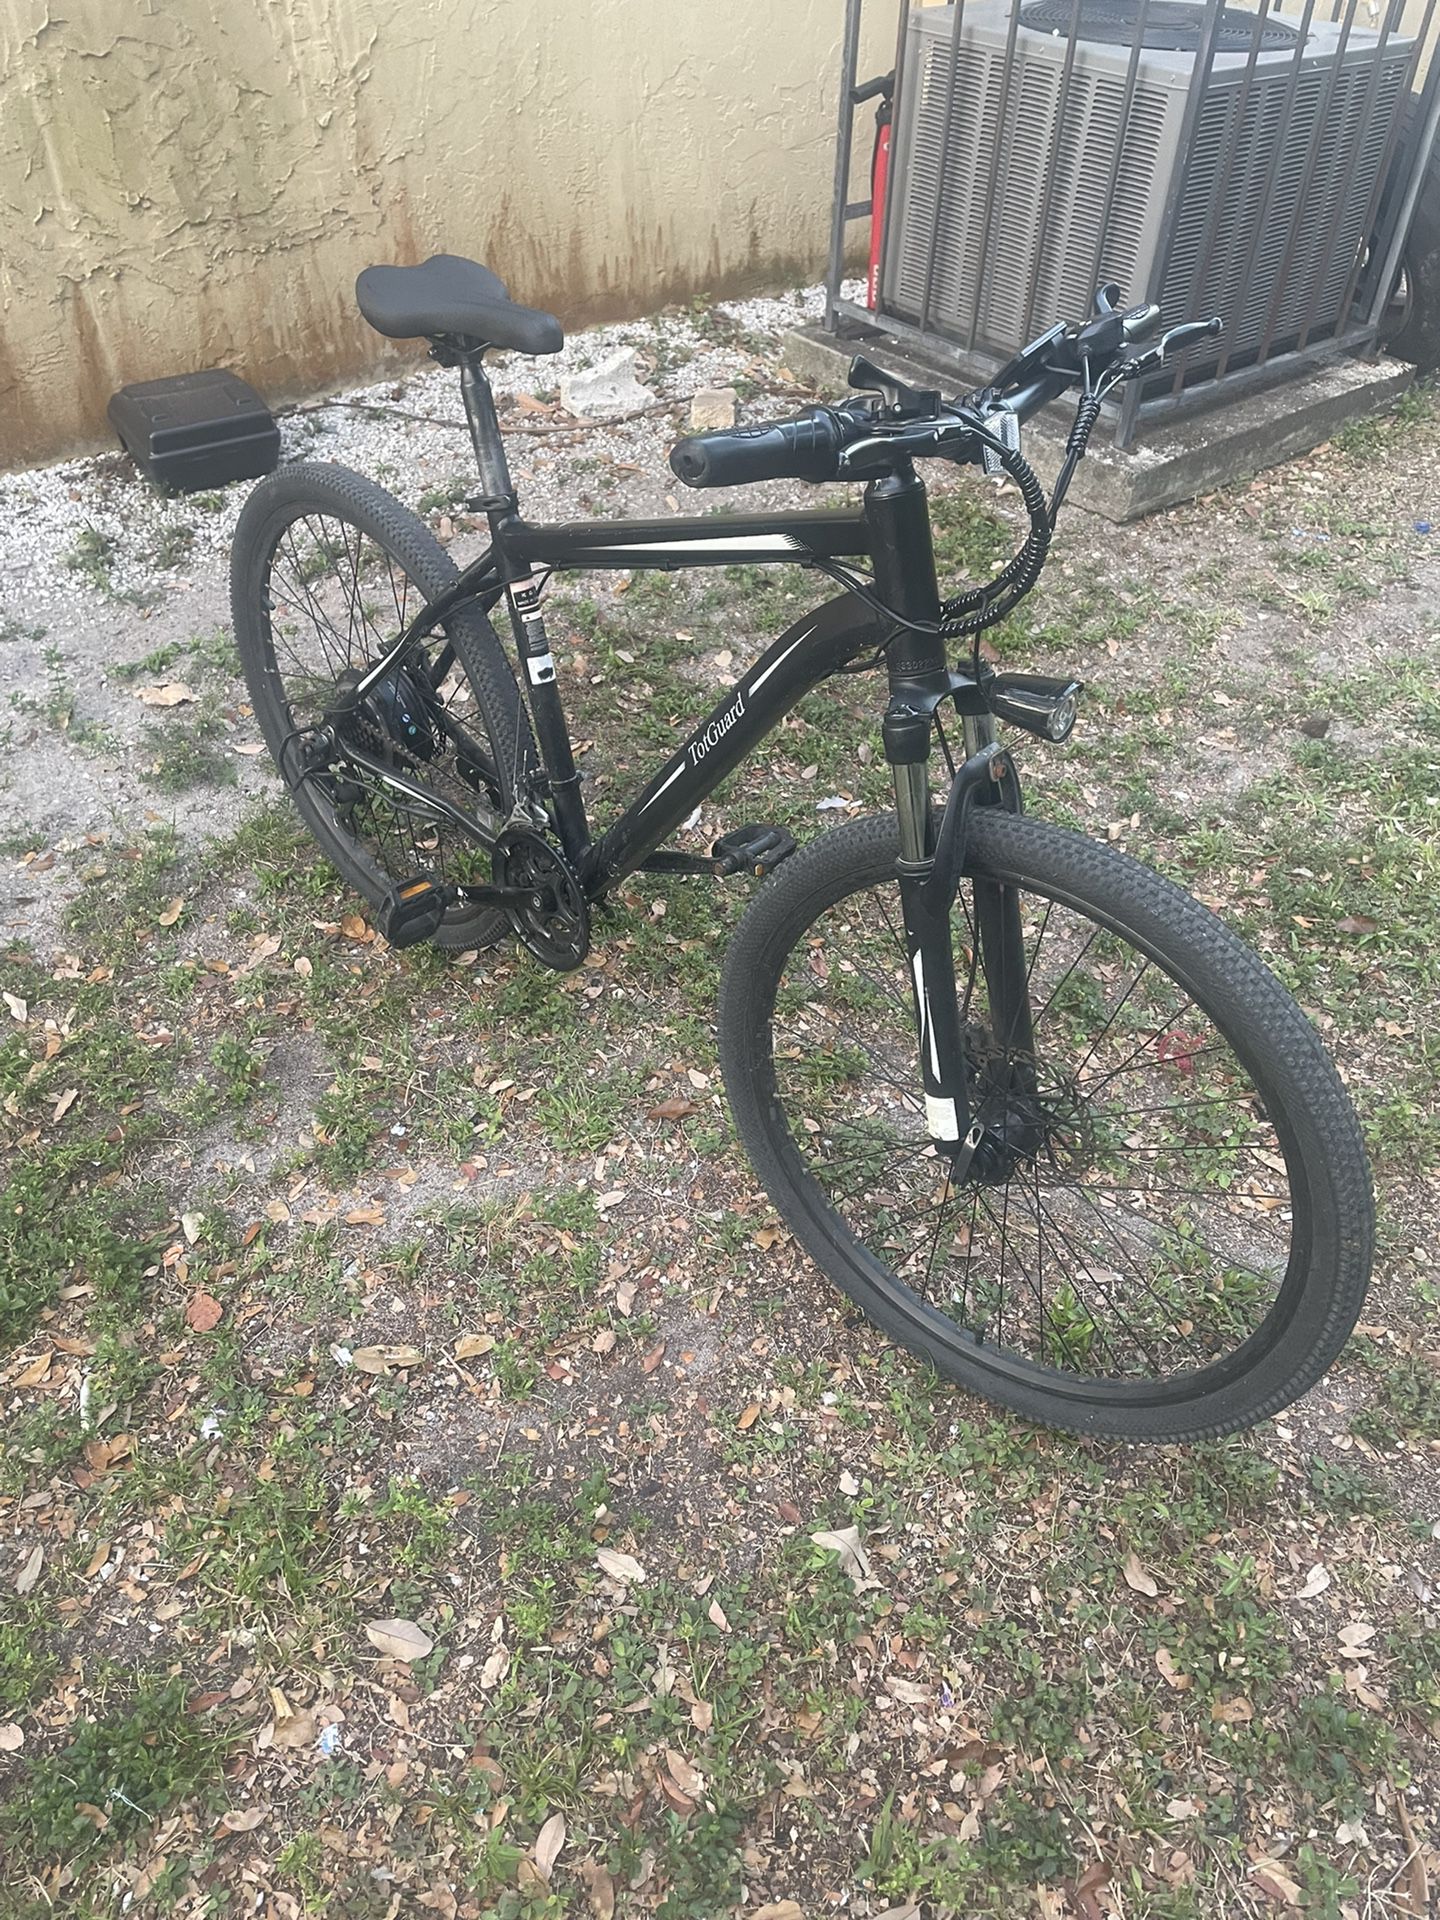 Electric Bike For Sale In Great Condition Just Need A New Battery $100